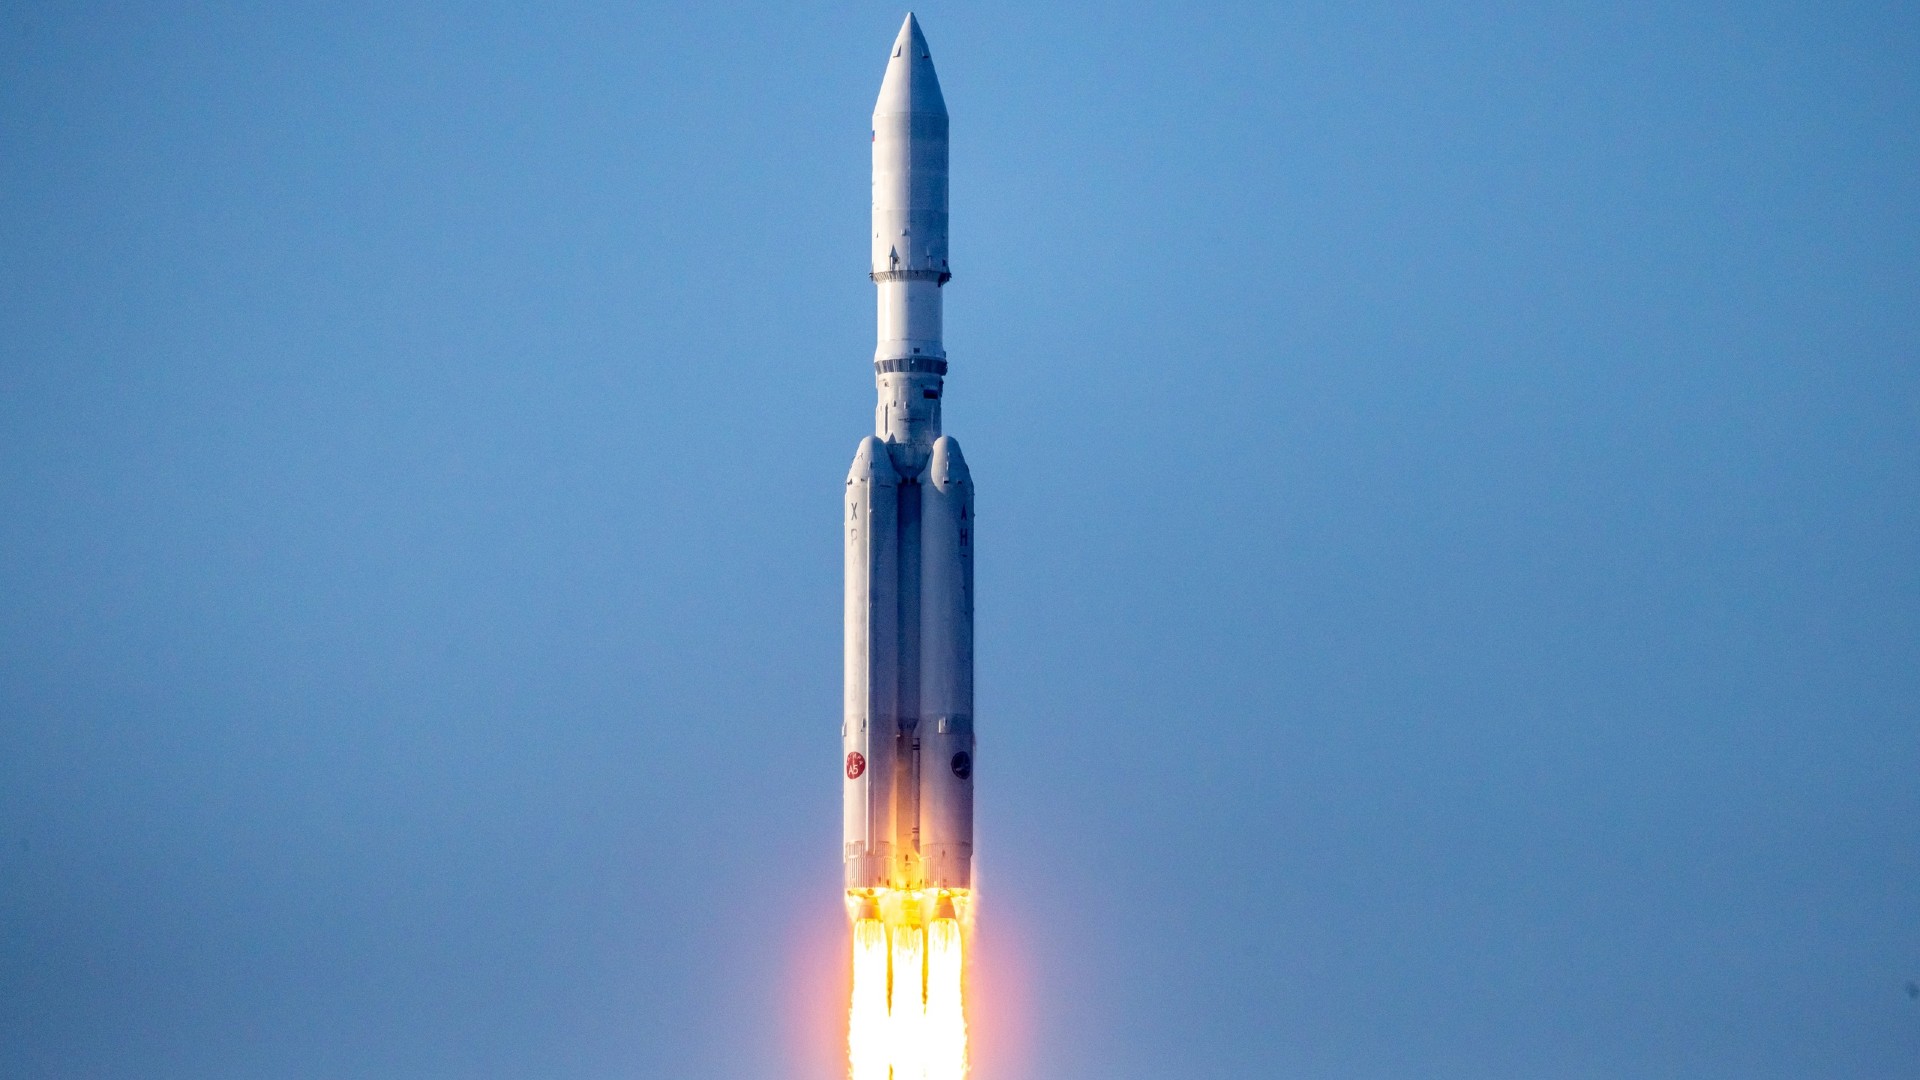 russia launches new angara a5 heavy-lift rocket on 4th orbital test mission (photos)